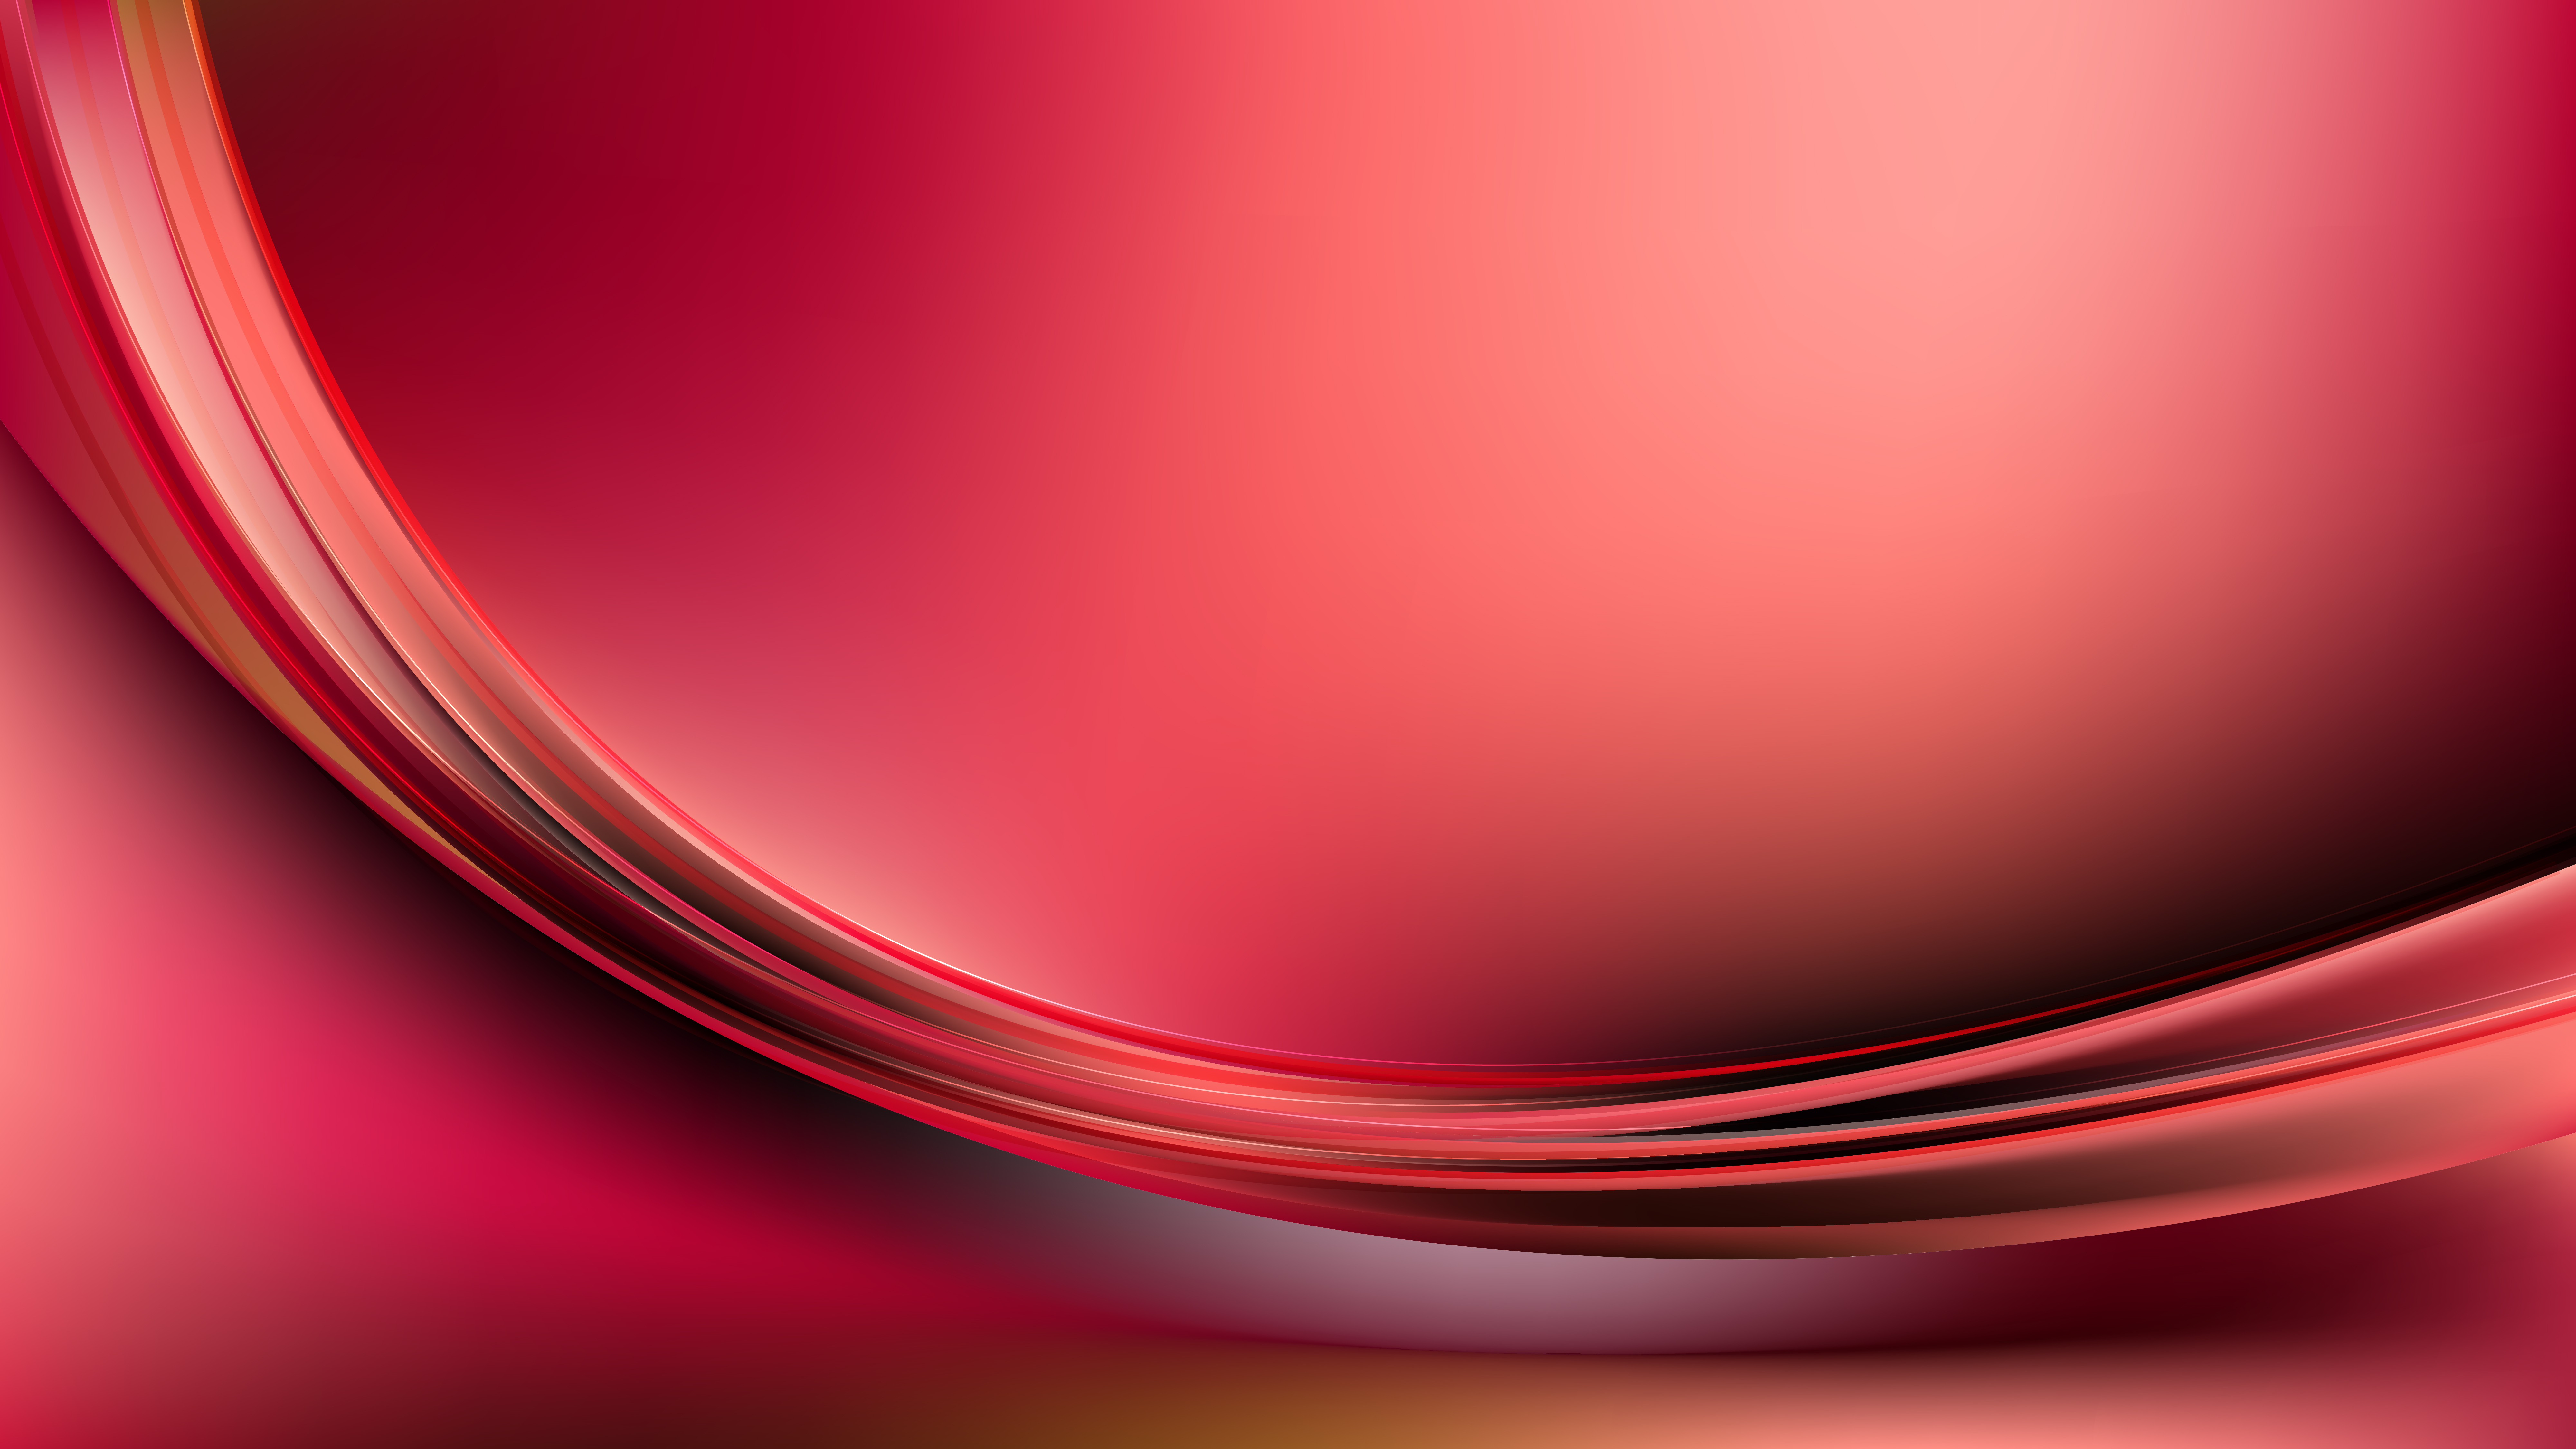 Free Abstract Dark Red Curve Background Vector Image